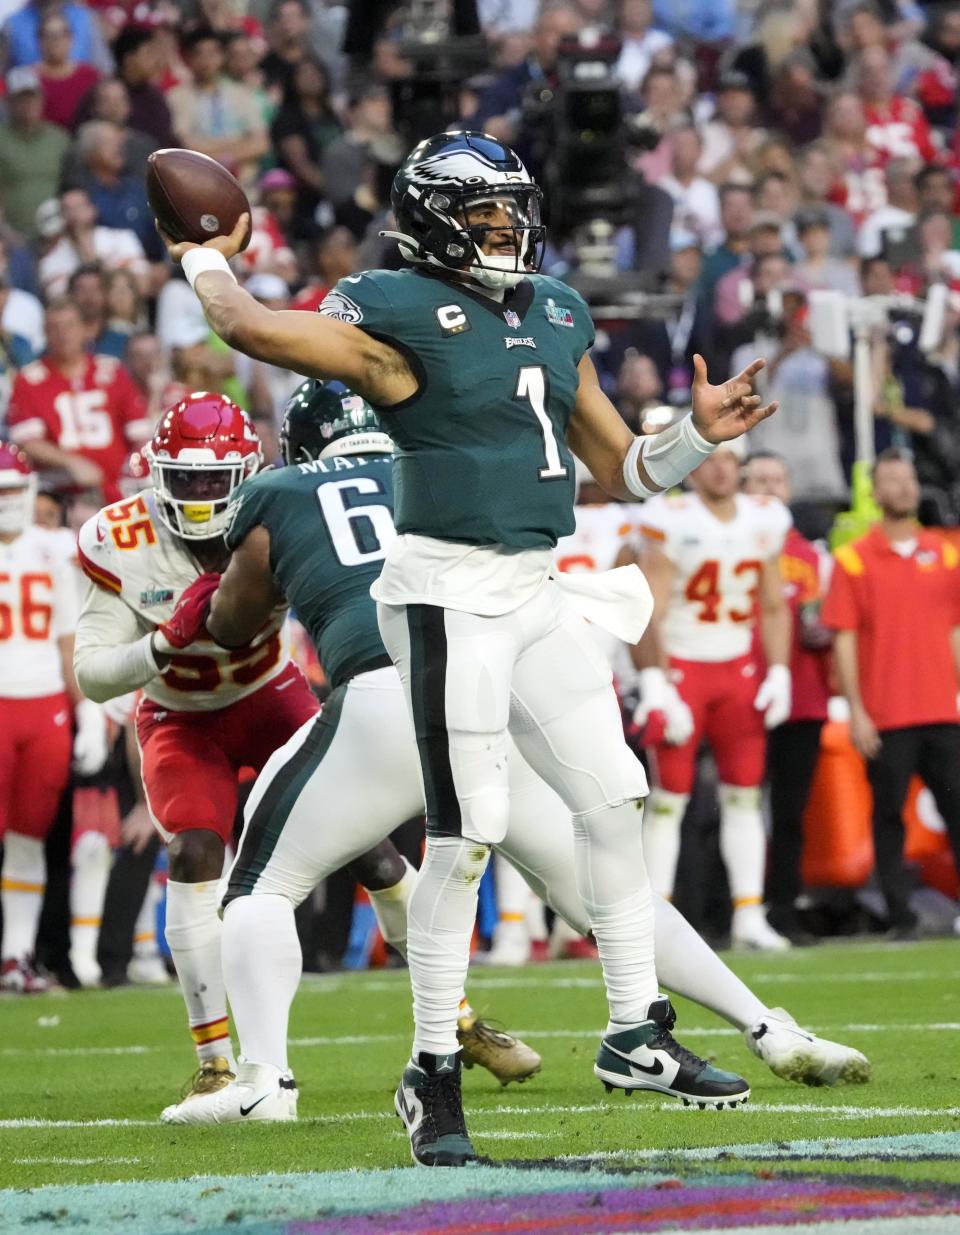 Feb 12, 2023; Glendale, AZ, USA; Philadelphia Eagles quarterback Jalen Hurts (1) throws a pass against the Kansas City Chiefs during the first half in Super Bowl LVII at State Farm Stadium. Mandatory Credit: Michael Chow/The Republic via USA TODAY Sports